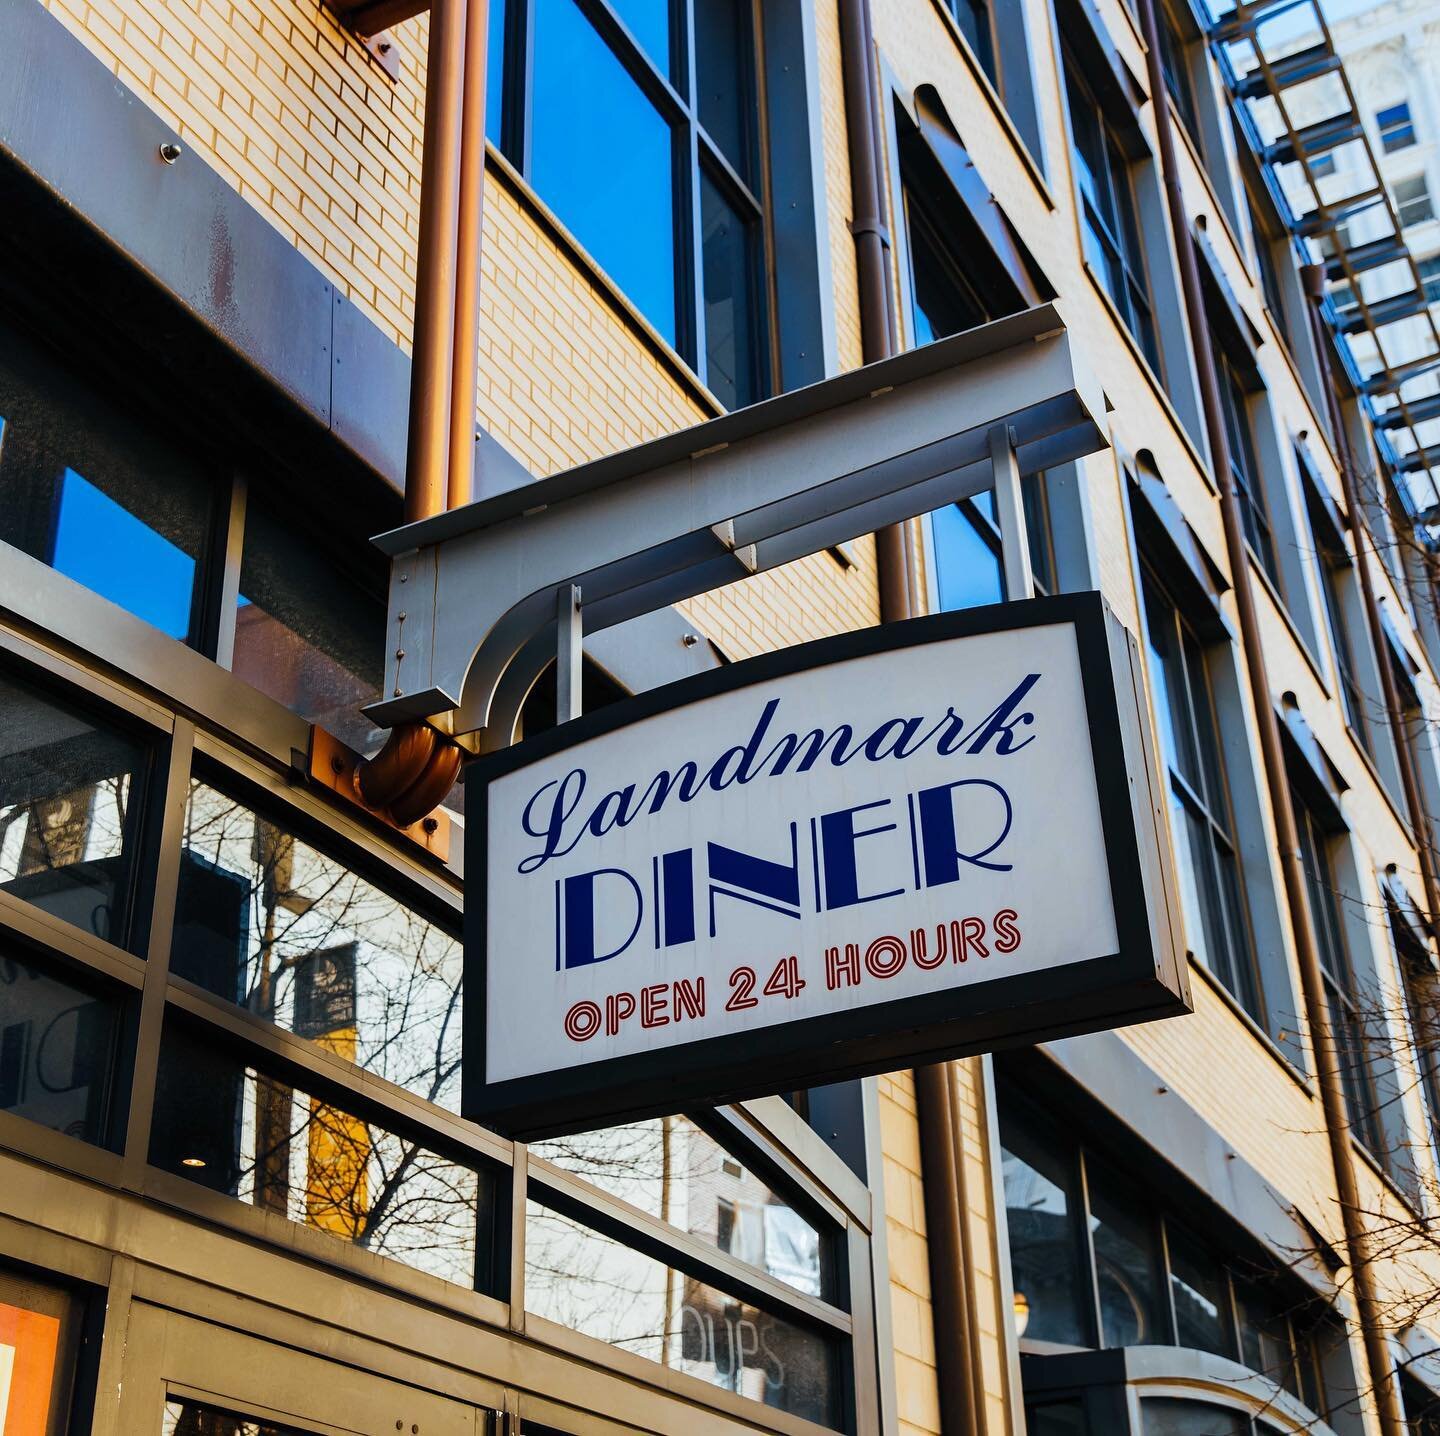 Out of all these delicious lunch options, what&rsquo;s your go-to restaurant in @downtownatlanta?